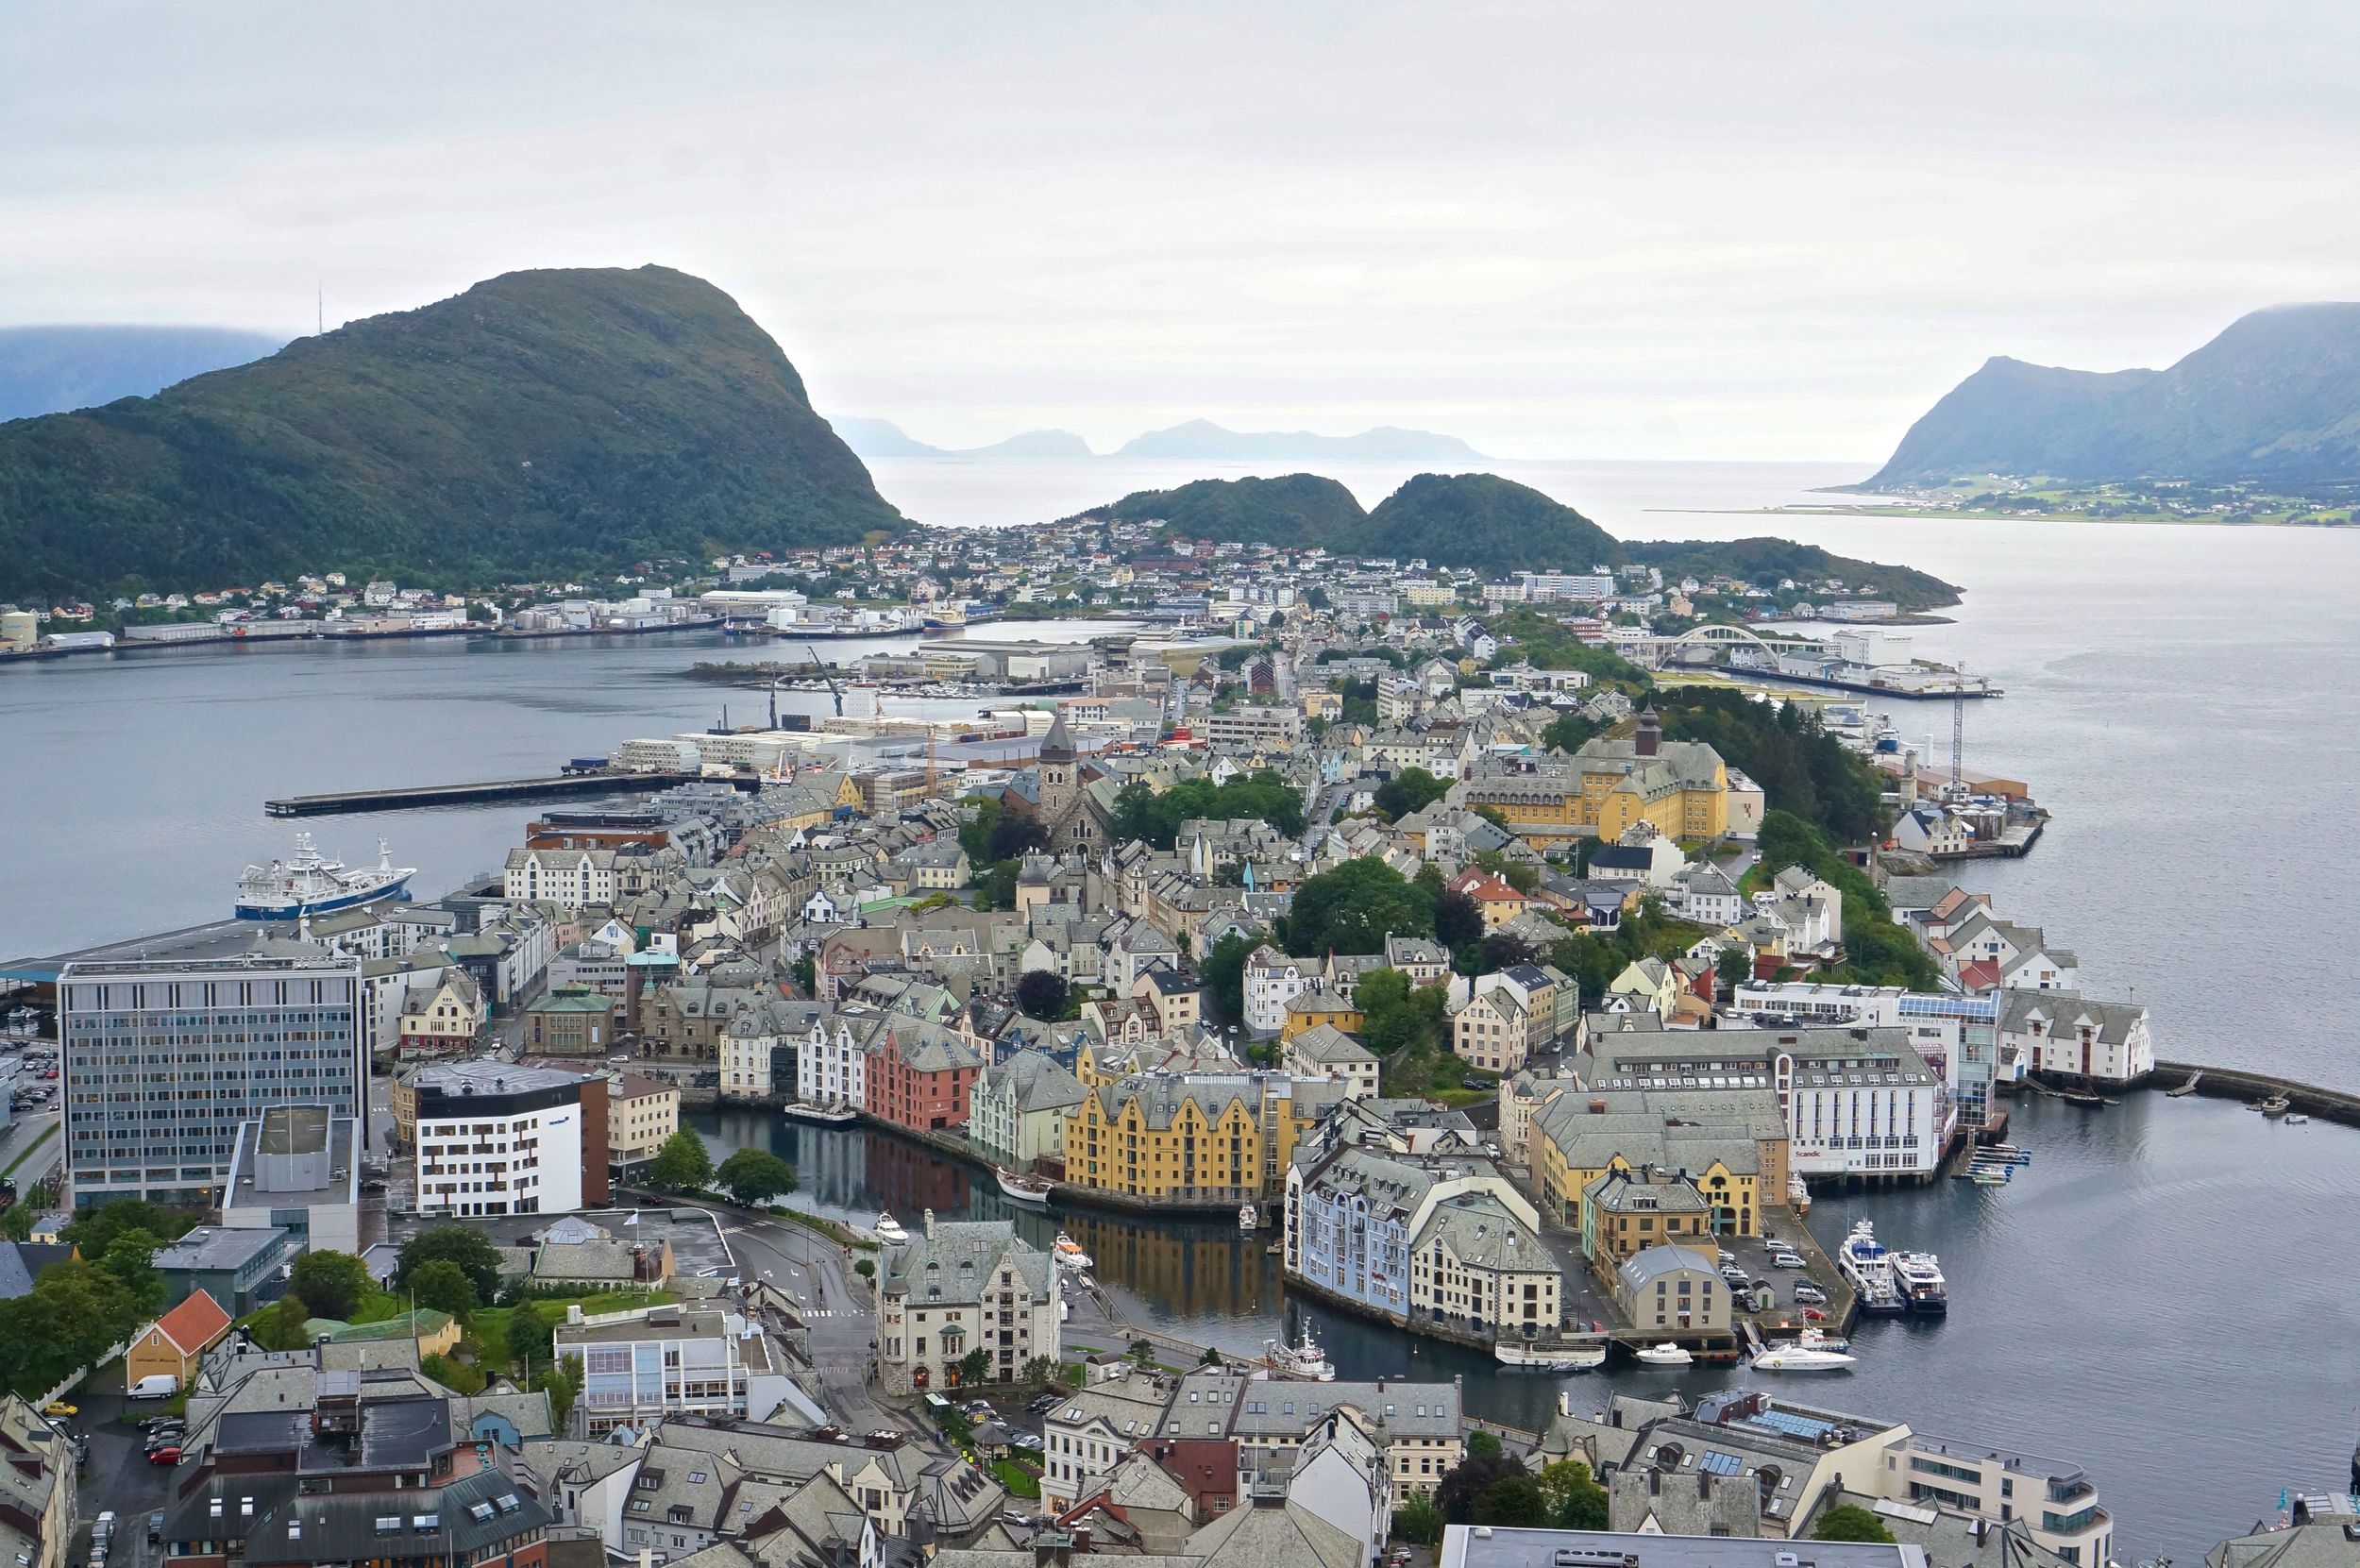 Alesund, Norway: When a Place Feels like Home